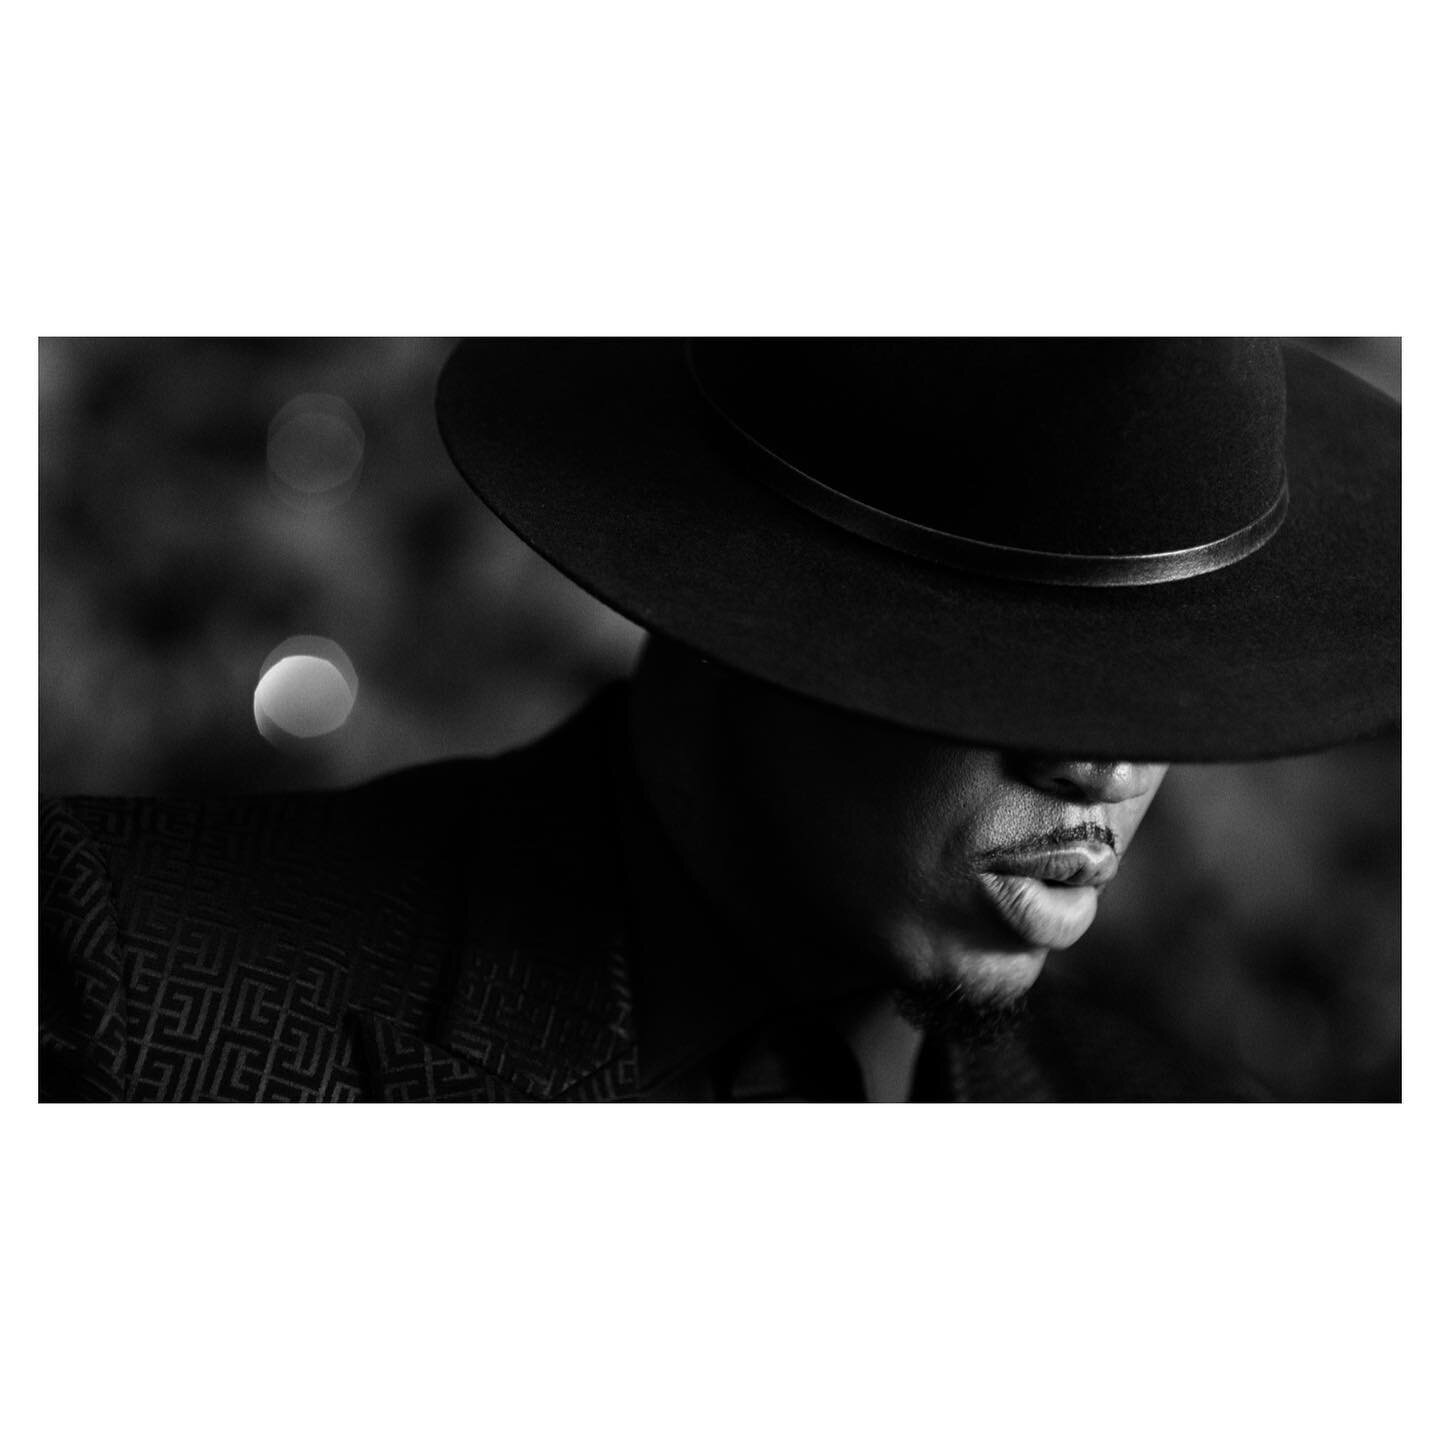 Ne-Yo a few weeks ago with the one and only @mayatable

Full video on my website